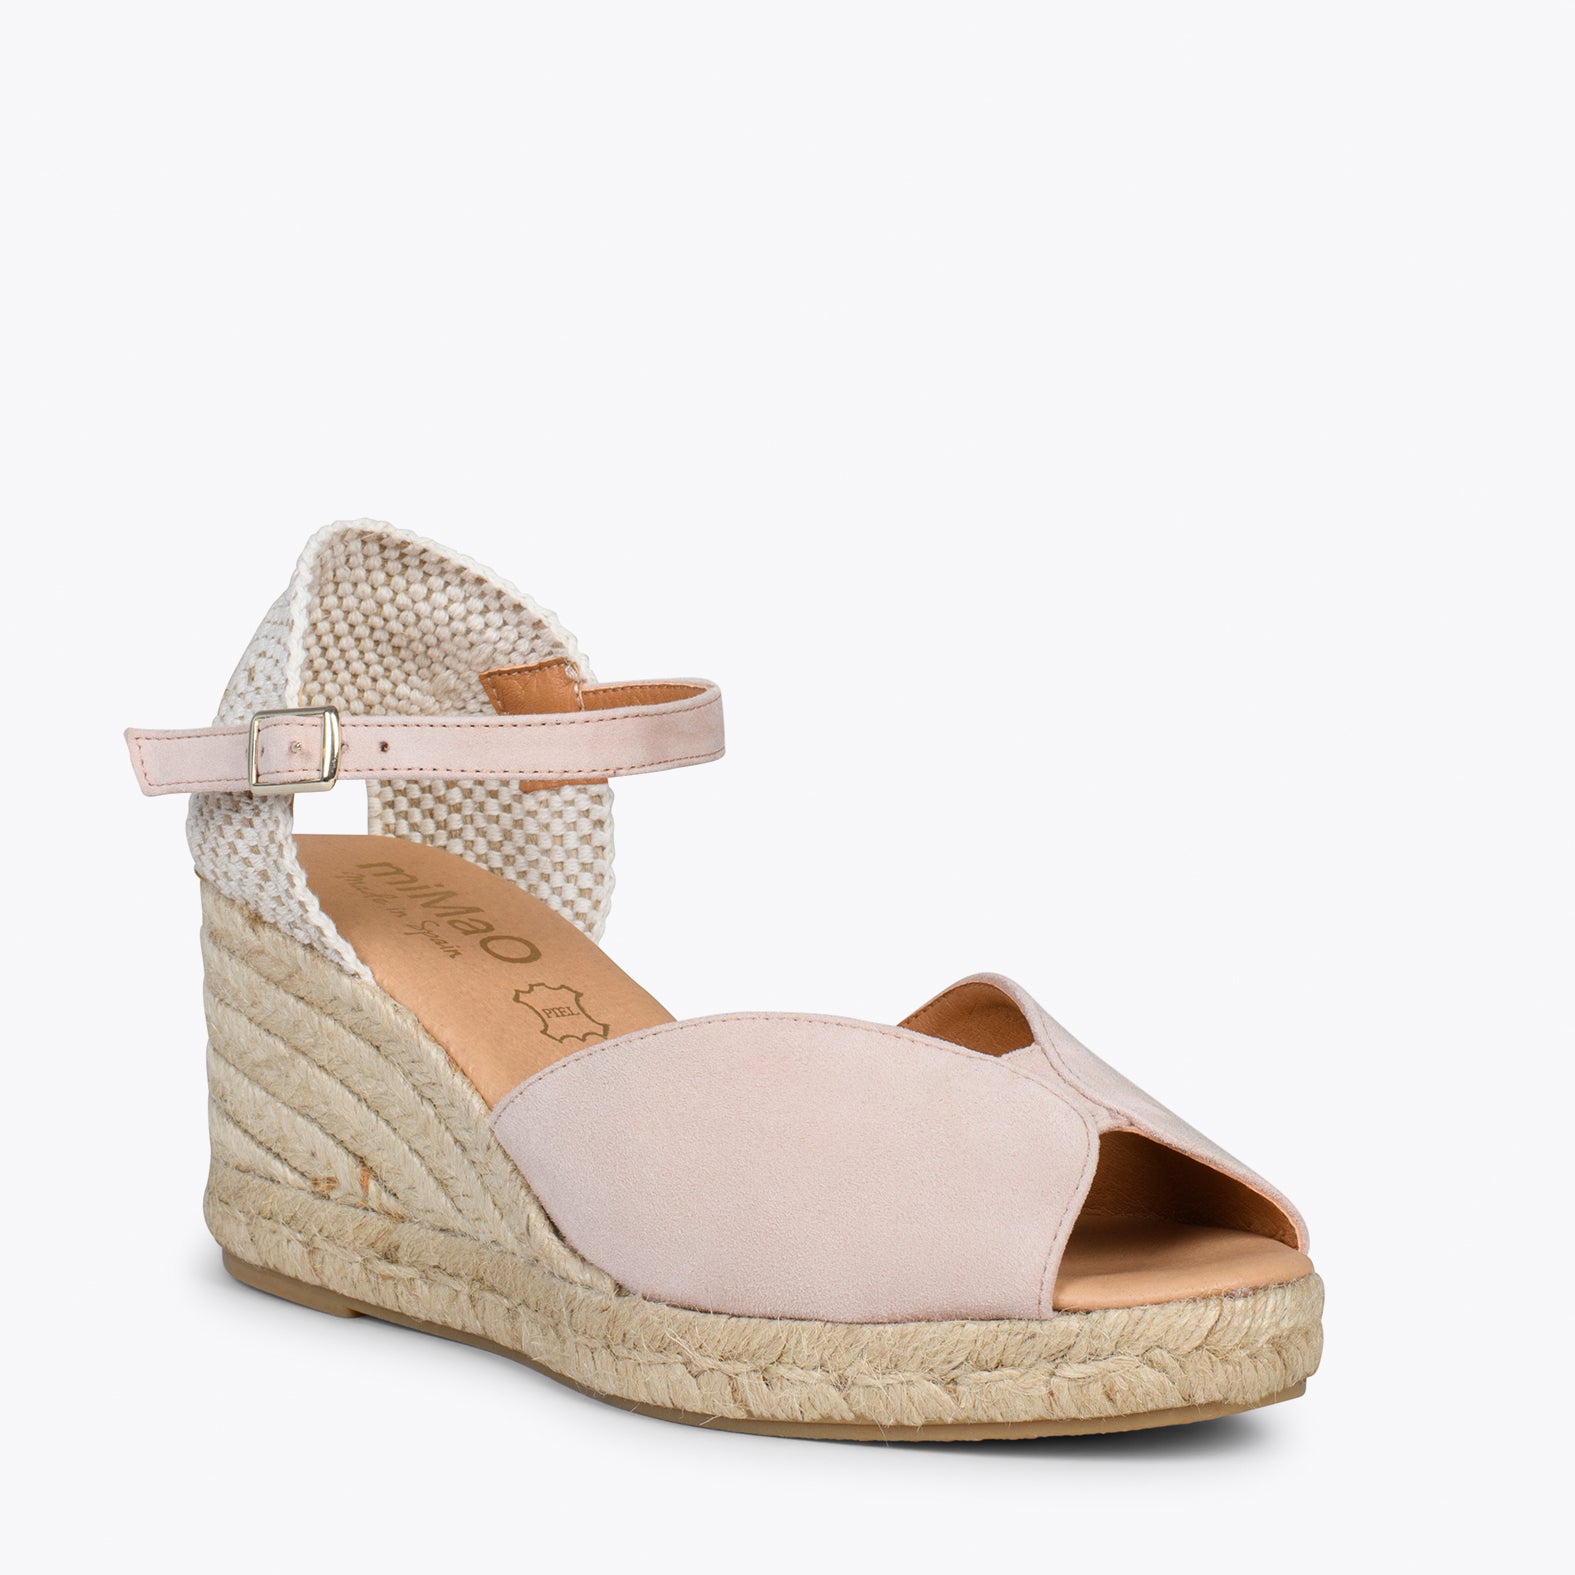 SITGES – NUDE espadrille wedges with double shovel